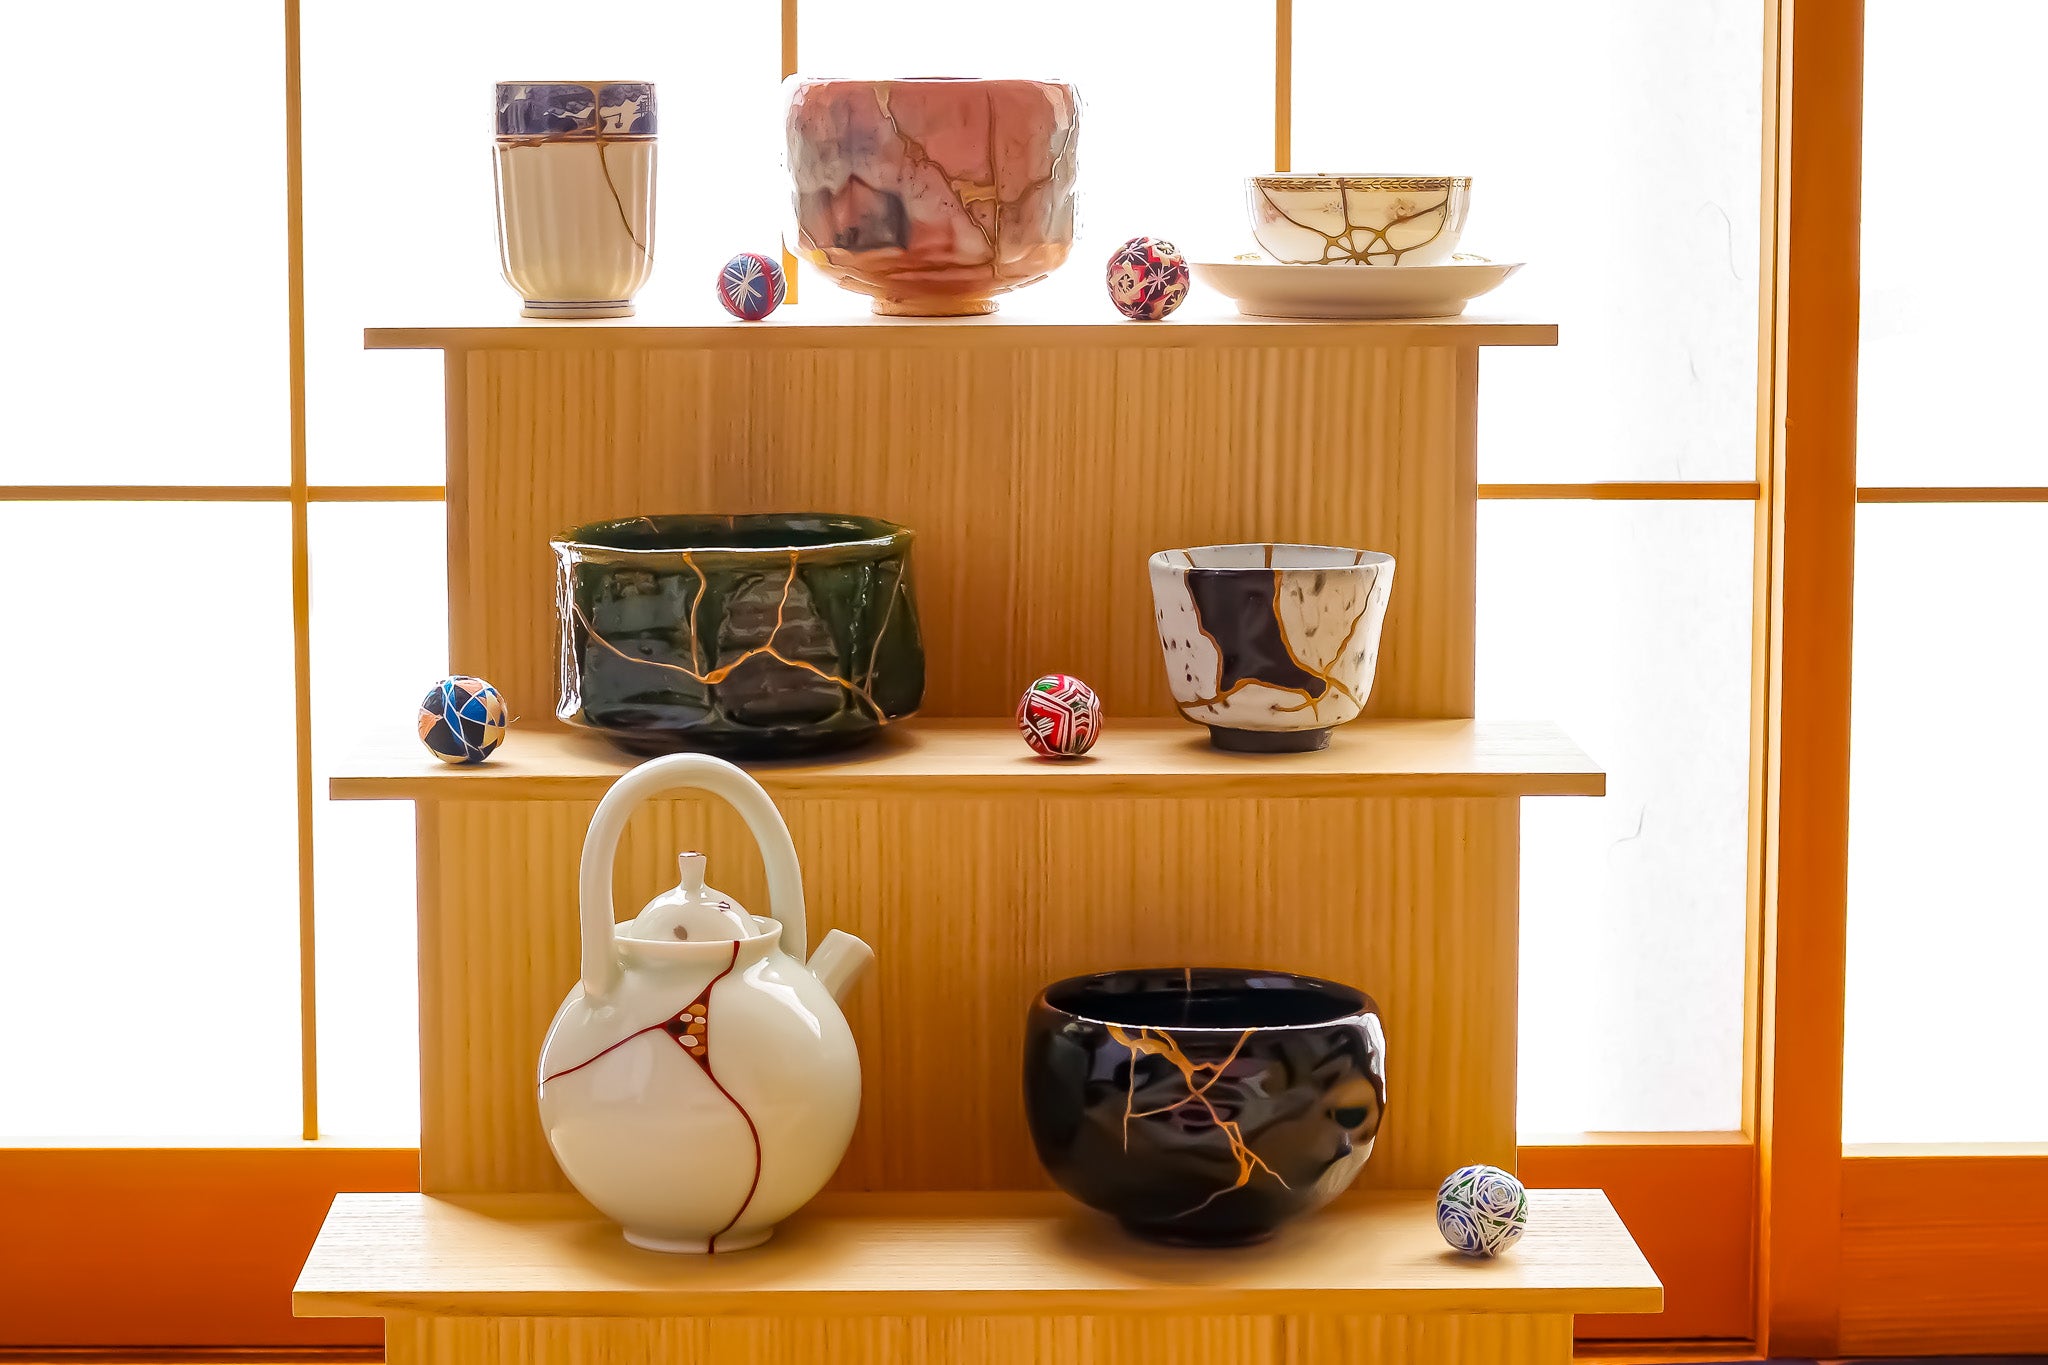 Hand-repaired Kintsugi Pottery Collection available online. Shop authentic Japanese ceramics with unique gold repairs.